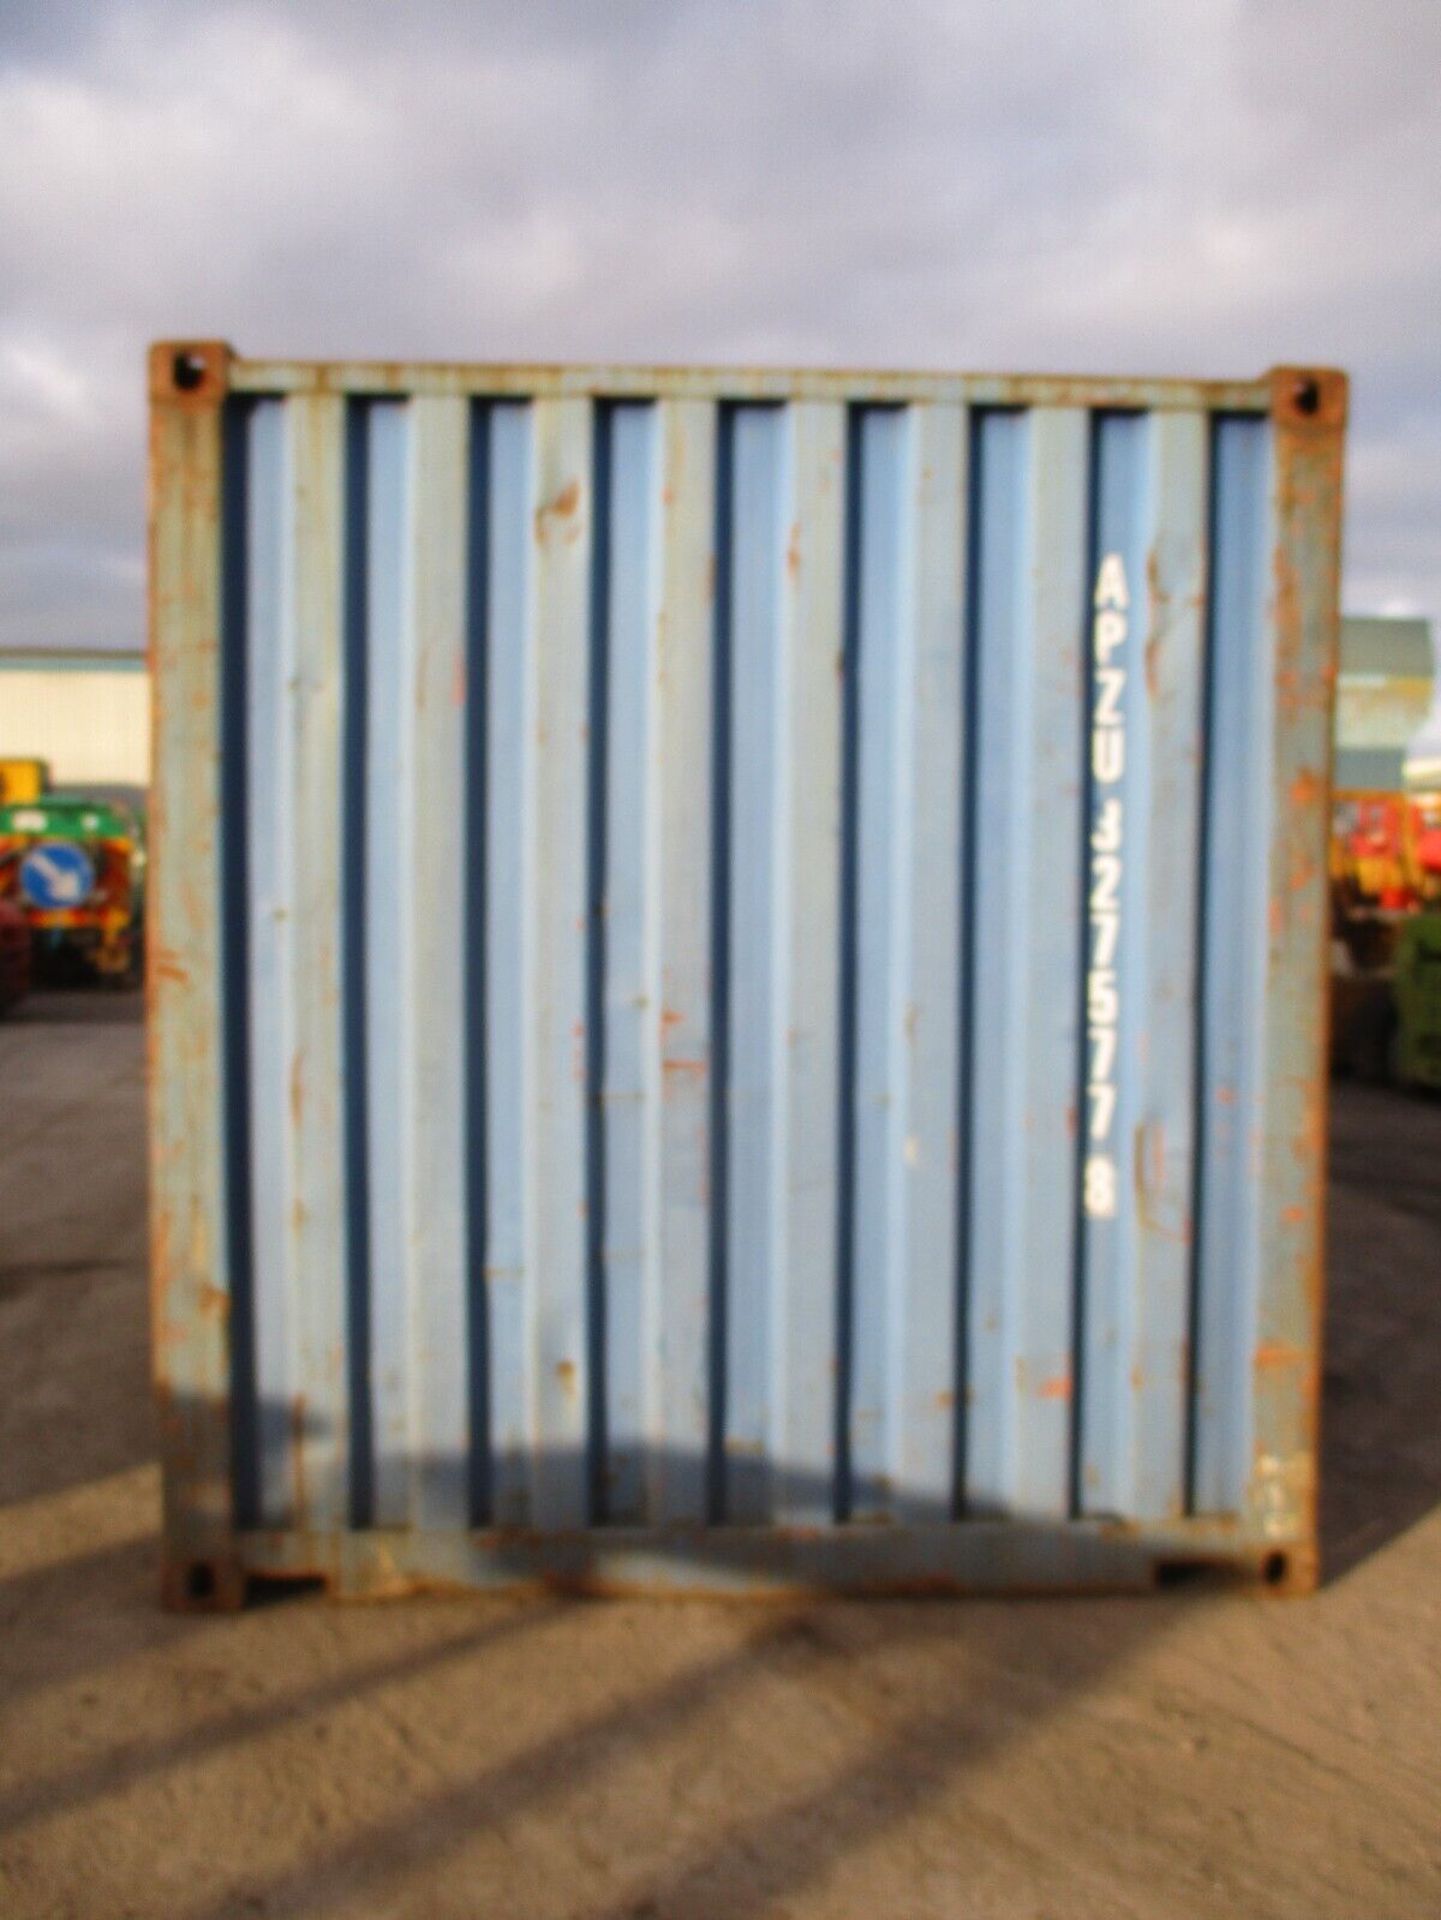 SHIPPING CONTAINER 20 FEET LONG X 8 FEET WIDE - Image 6 of 9